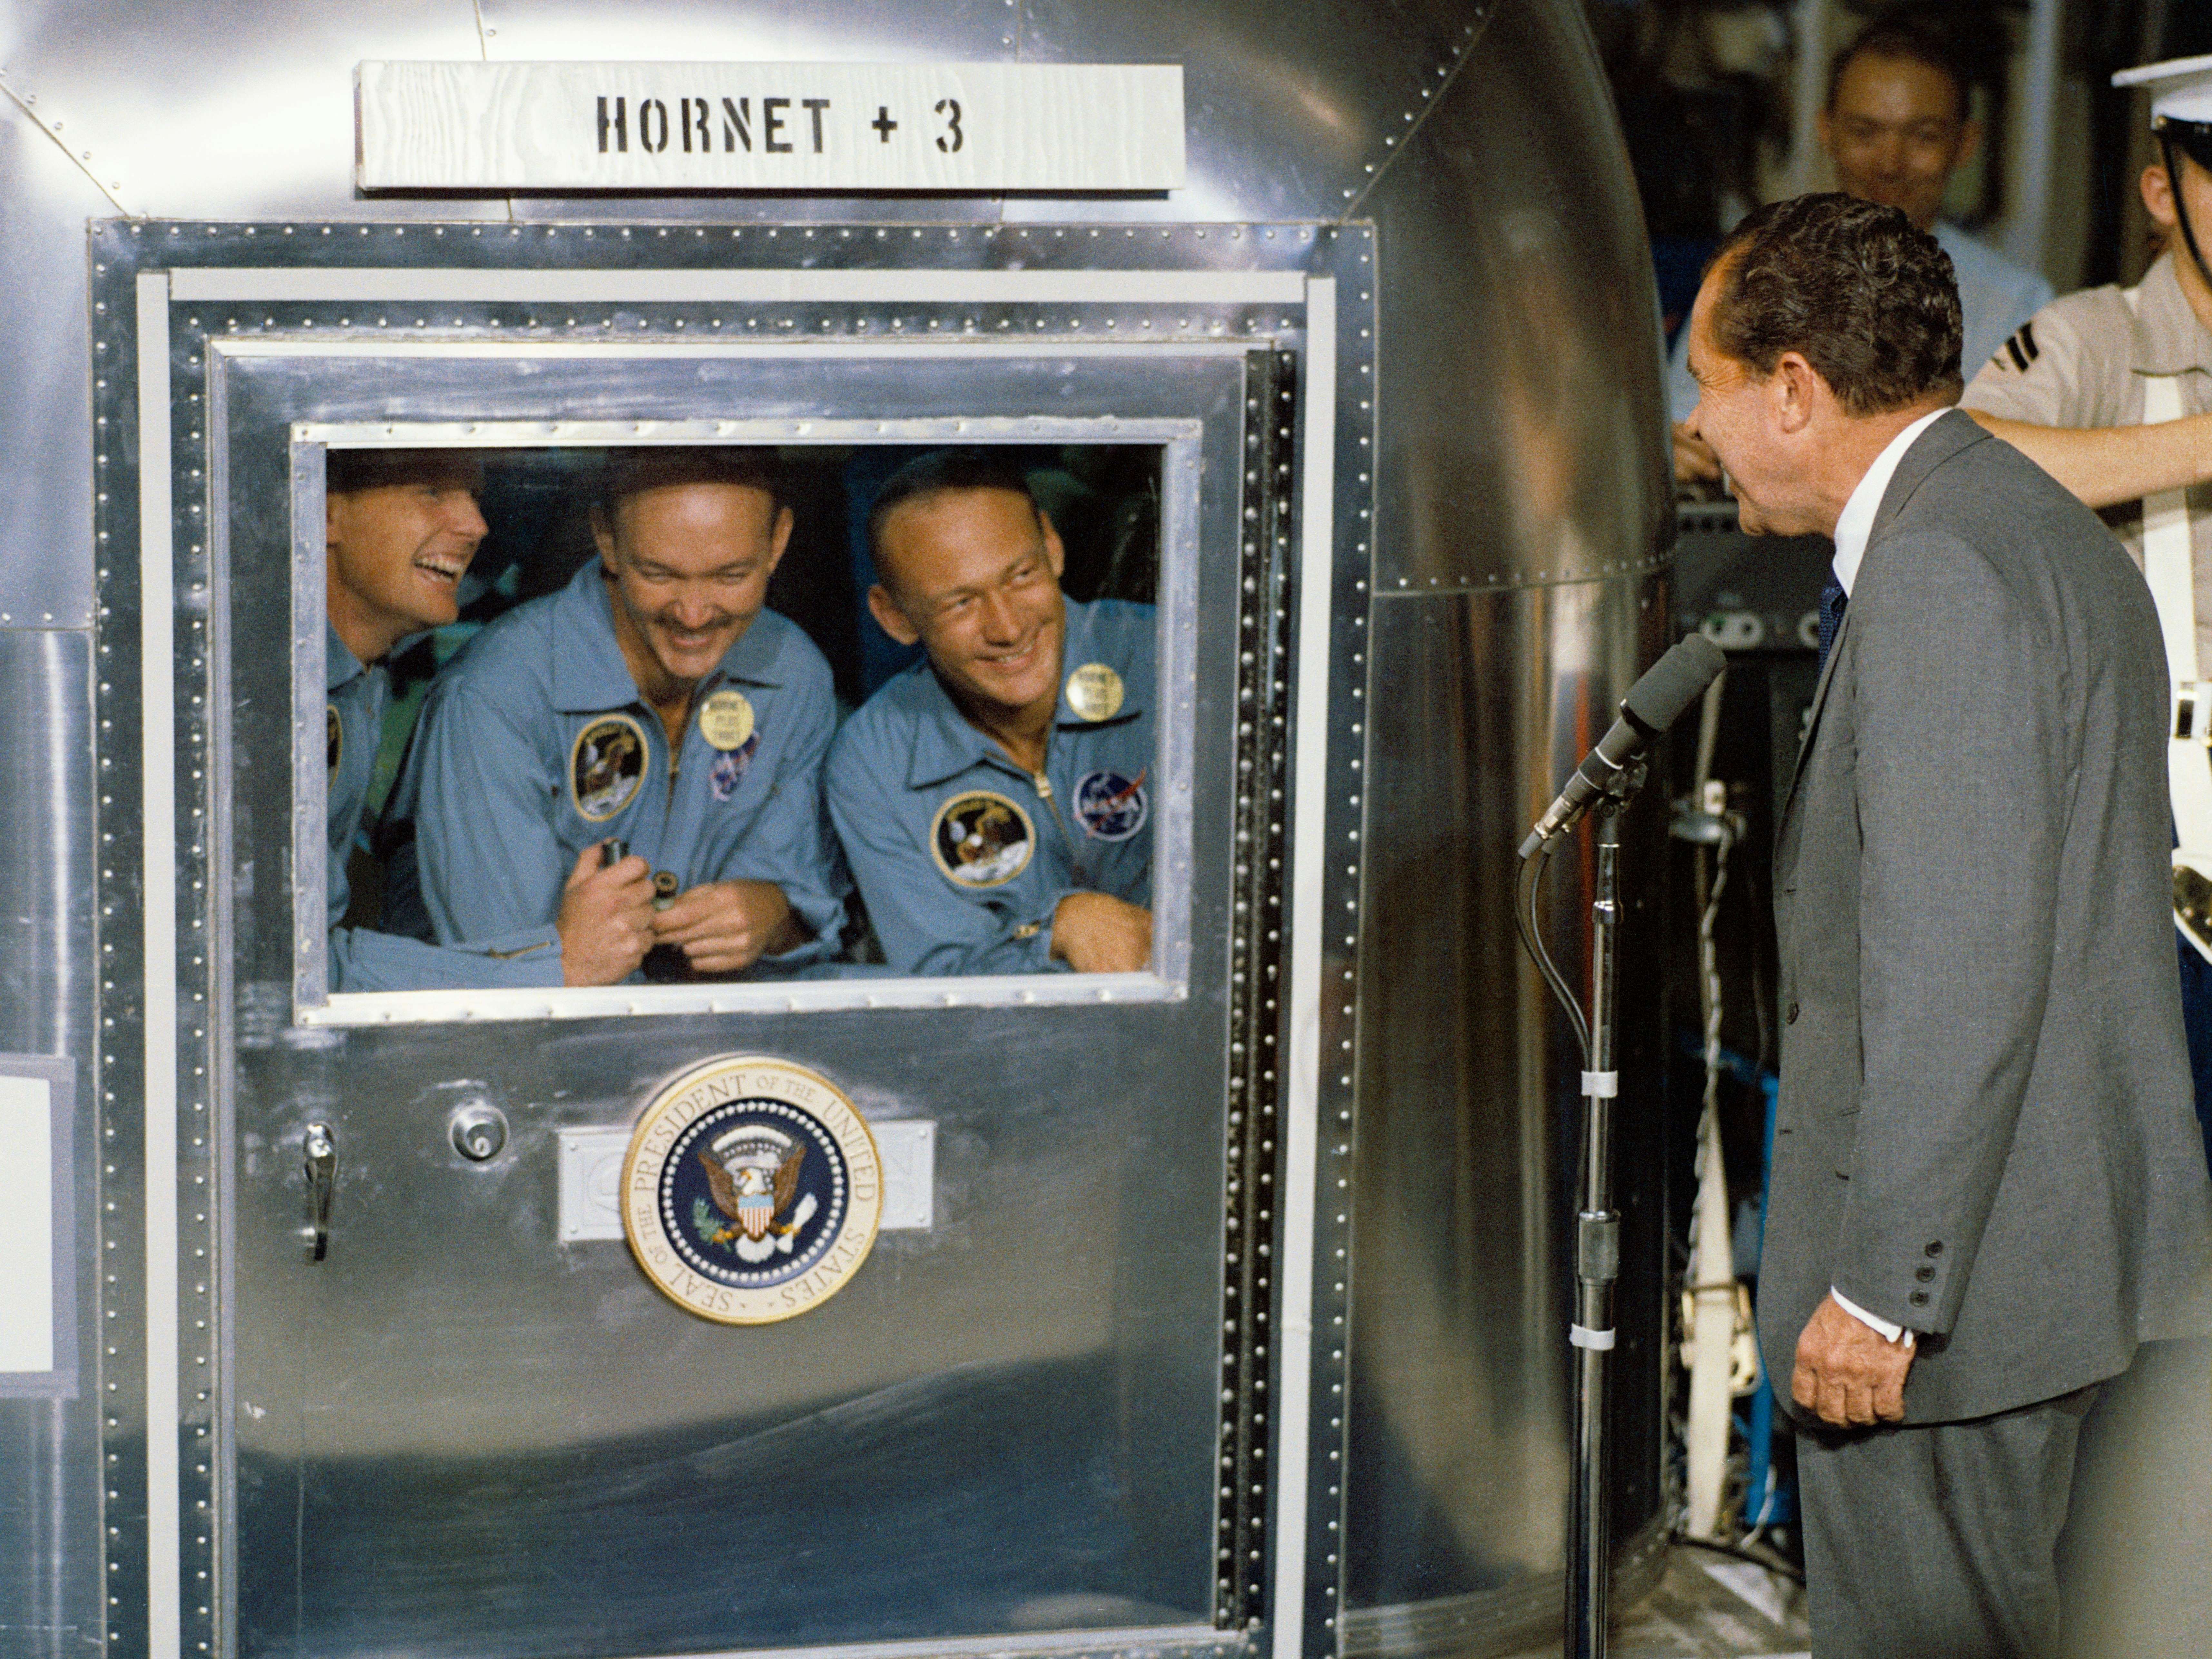 On July 24, 1969, President Richard Nixon welcomes the quarantined Apollo 11 astronauts, Neil Armstrong, Michael Collins, and Buzz Aldrin, aboard the U.S.S. Hornet after the historic Apollo 11 lunar landing mission.